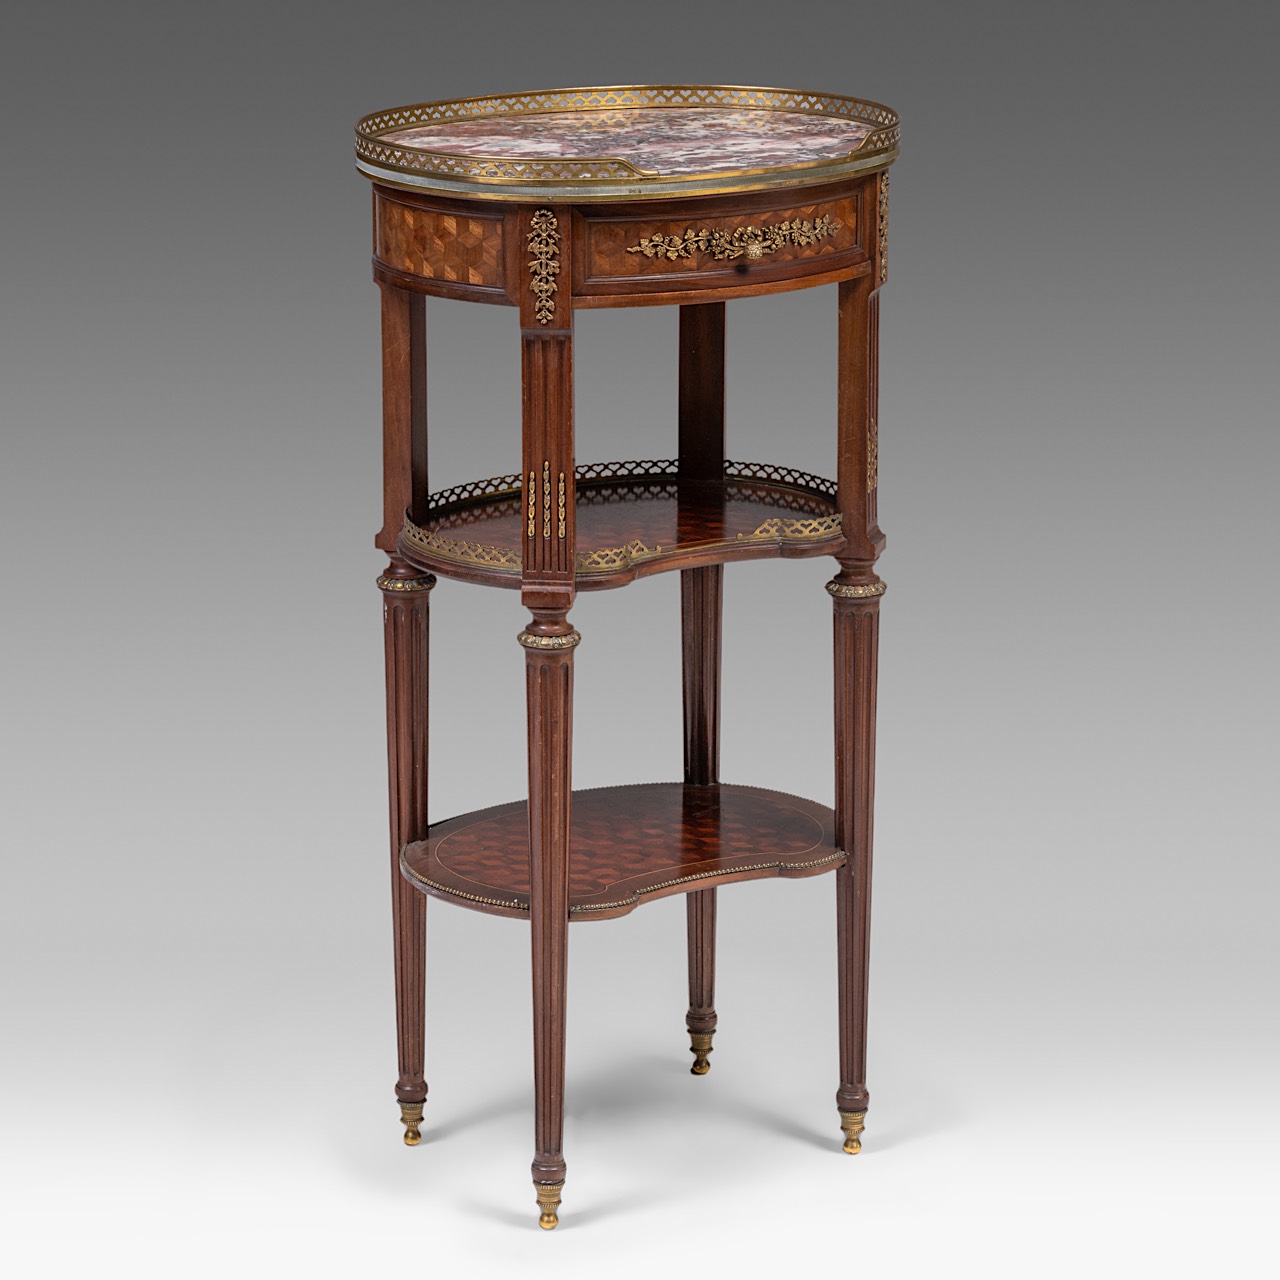 A Louis XVI-style marble-topped side table, signed Francois Linke (1855-1946), H 83,5 cm - W 44,5 cm